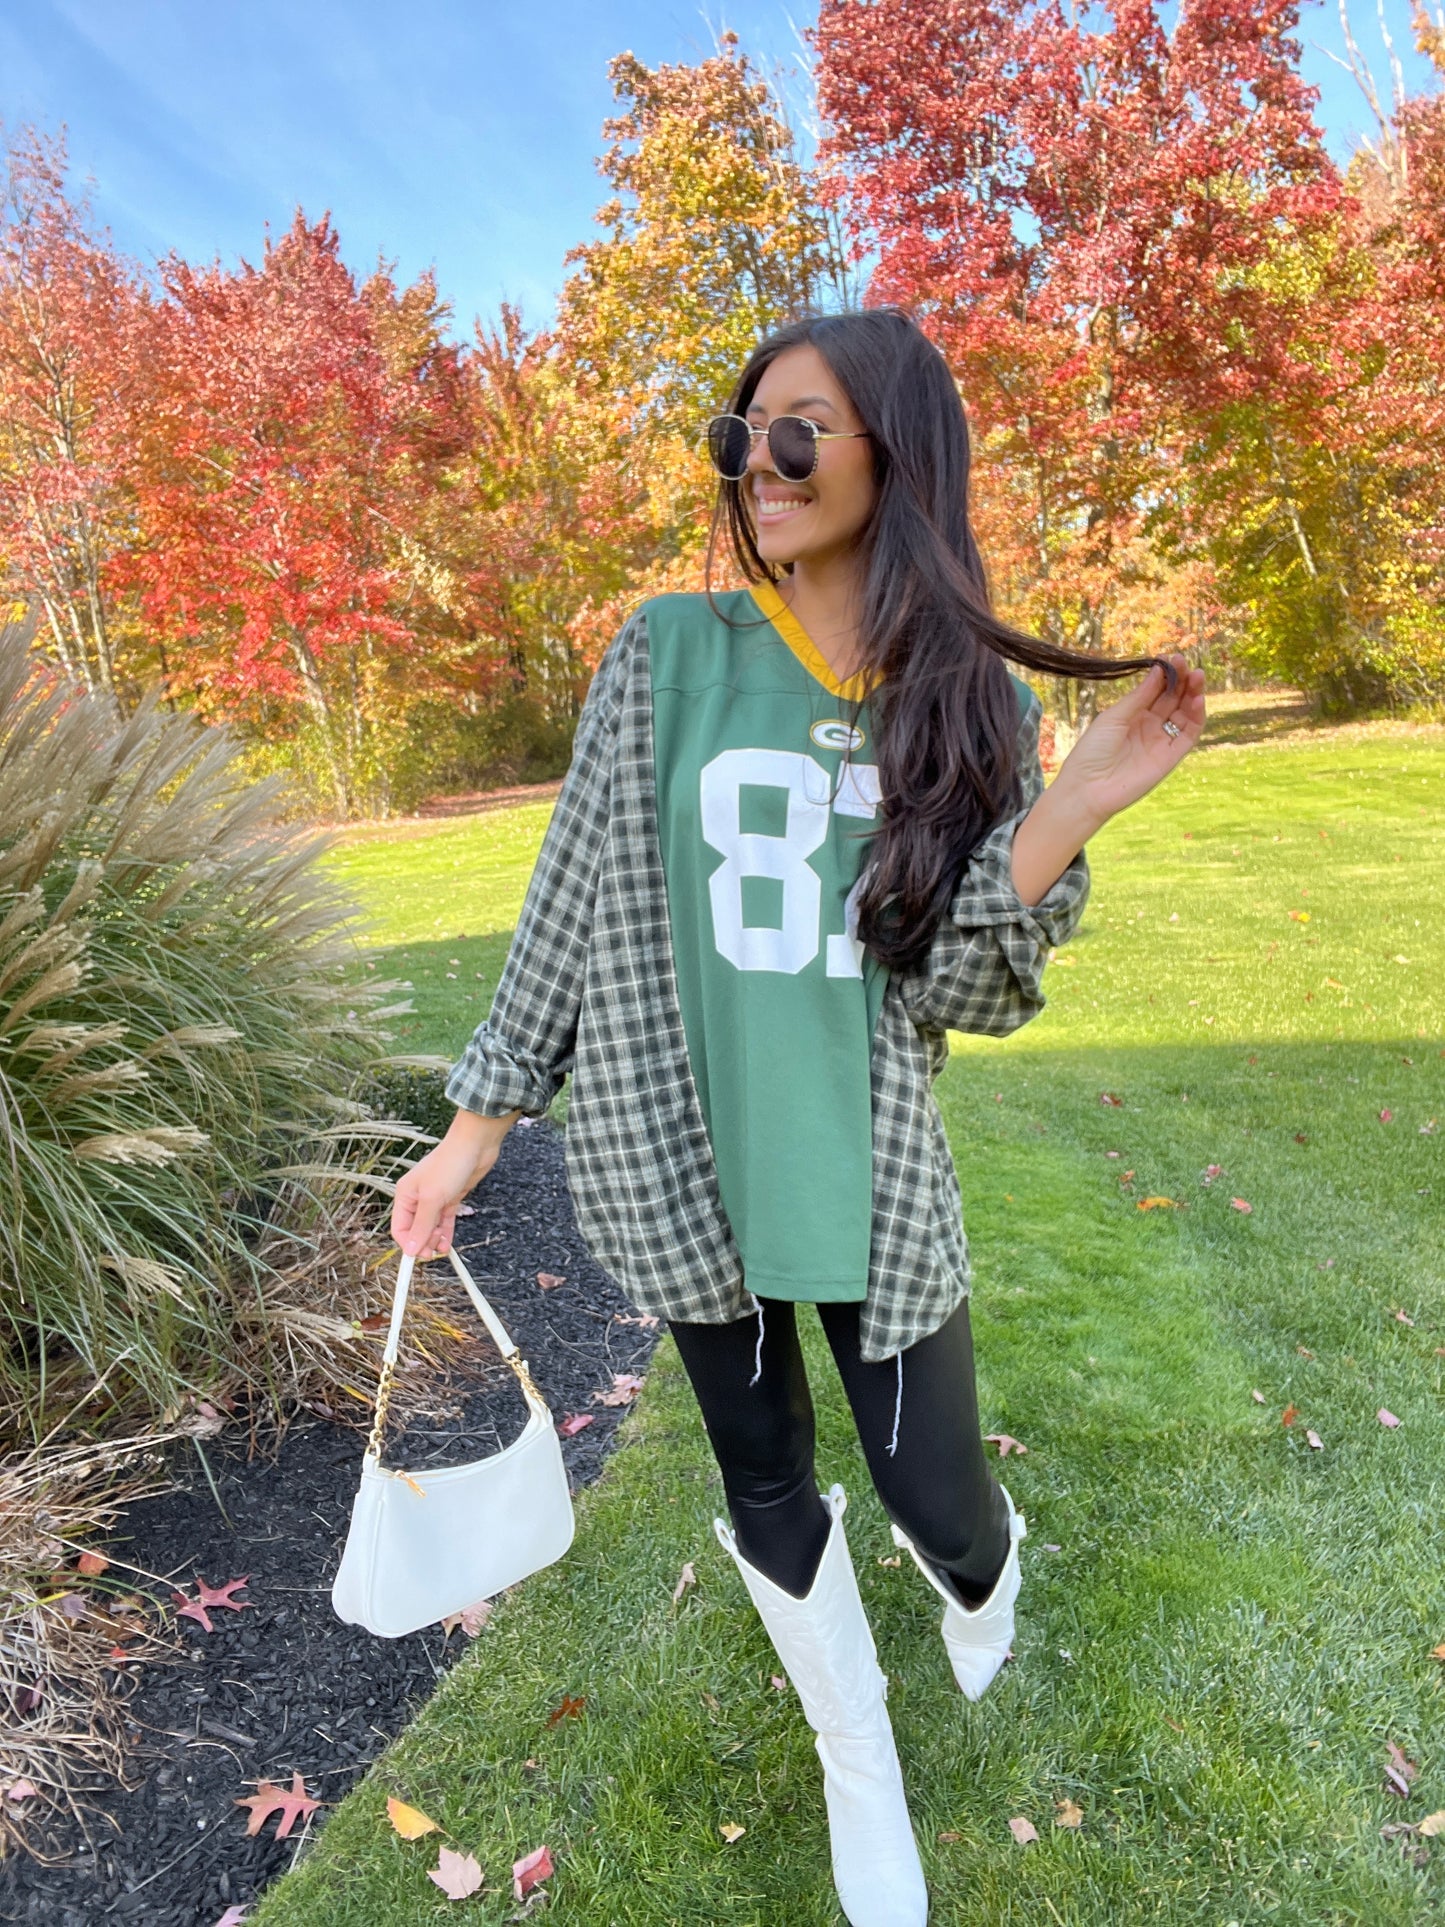 #87 NELSON PACKERS JERSEY X FLANNEL